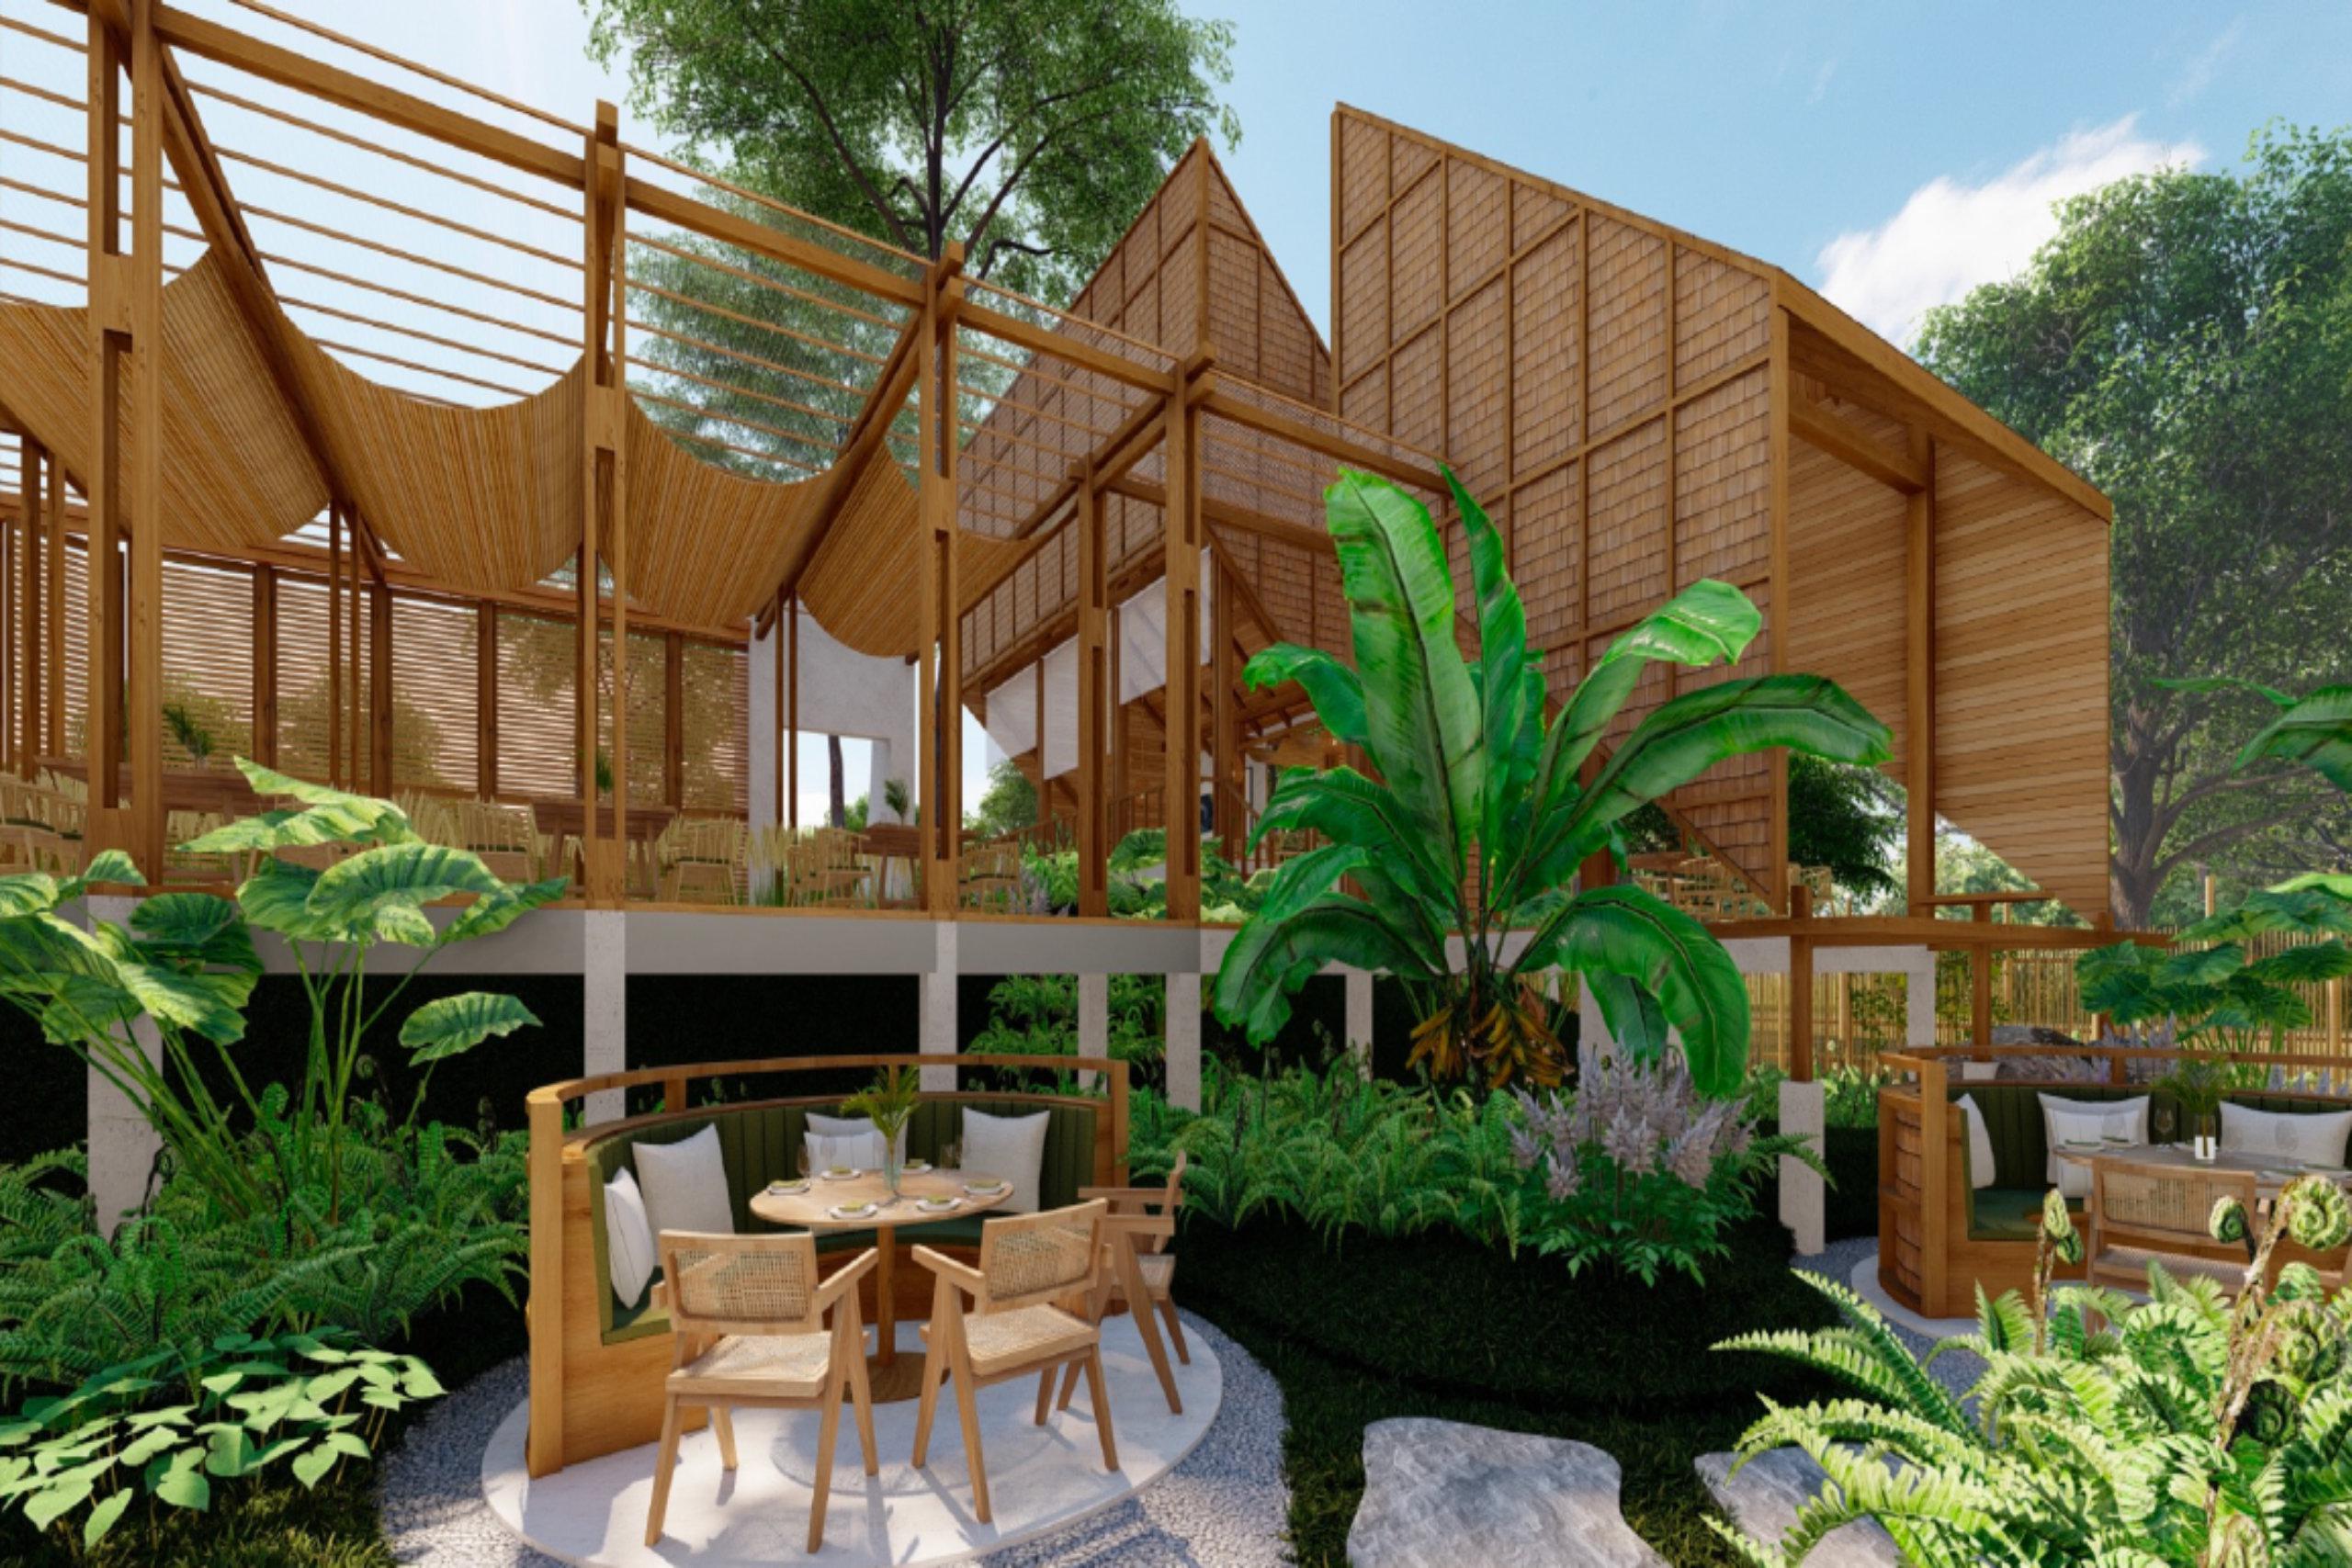 Permaculture Design Thailand - Food forest garden| Architects of Life | Based in France, Serving Globally